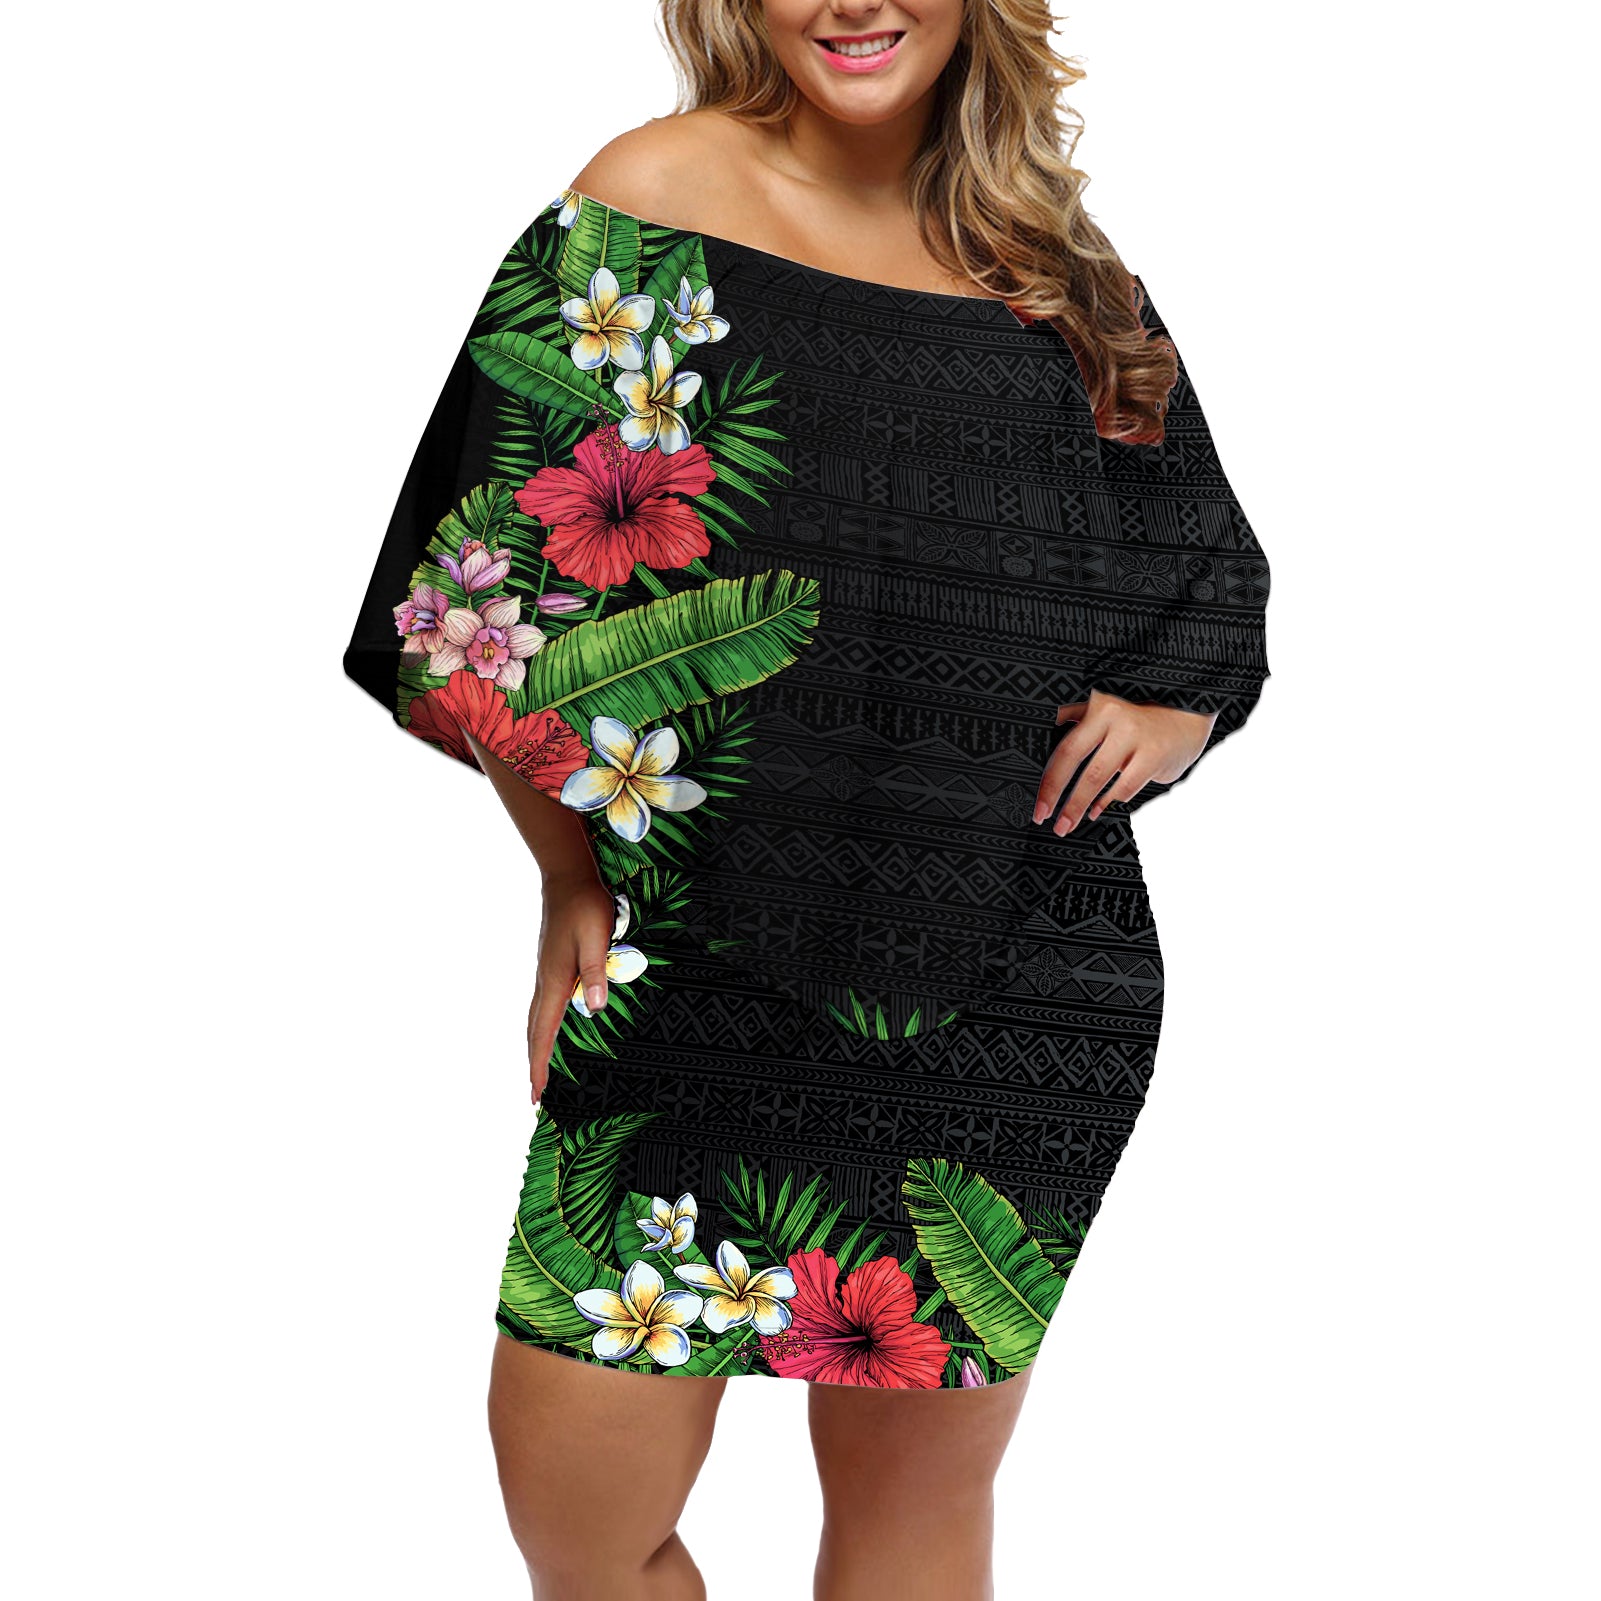 Hawaii Tropical Flowers and Leaves Off Shoulder Short Dress Tapa Pattern Colorful Mode